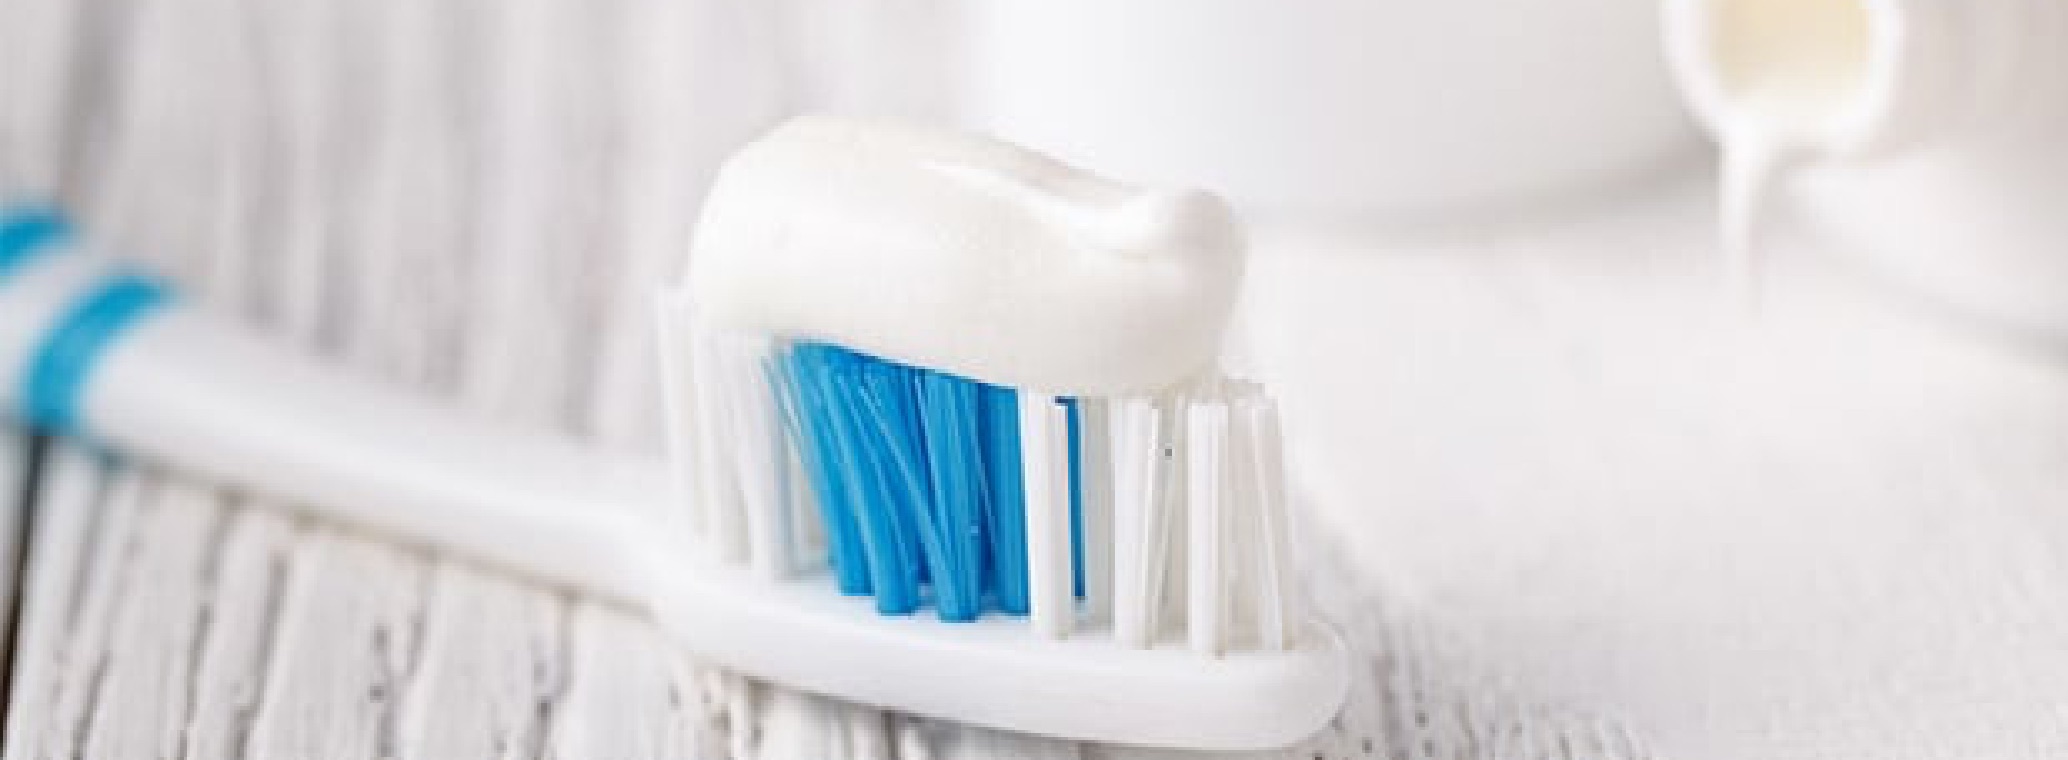 Glycerin in Toothpaste: What You Need to Know